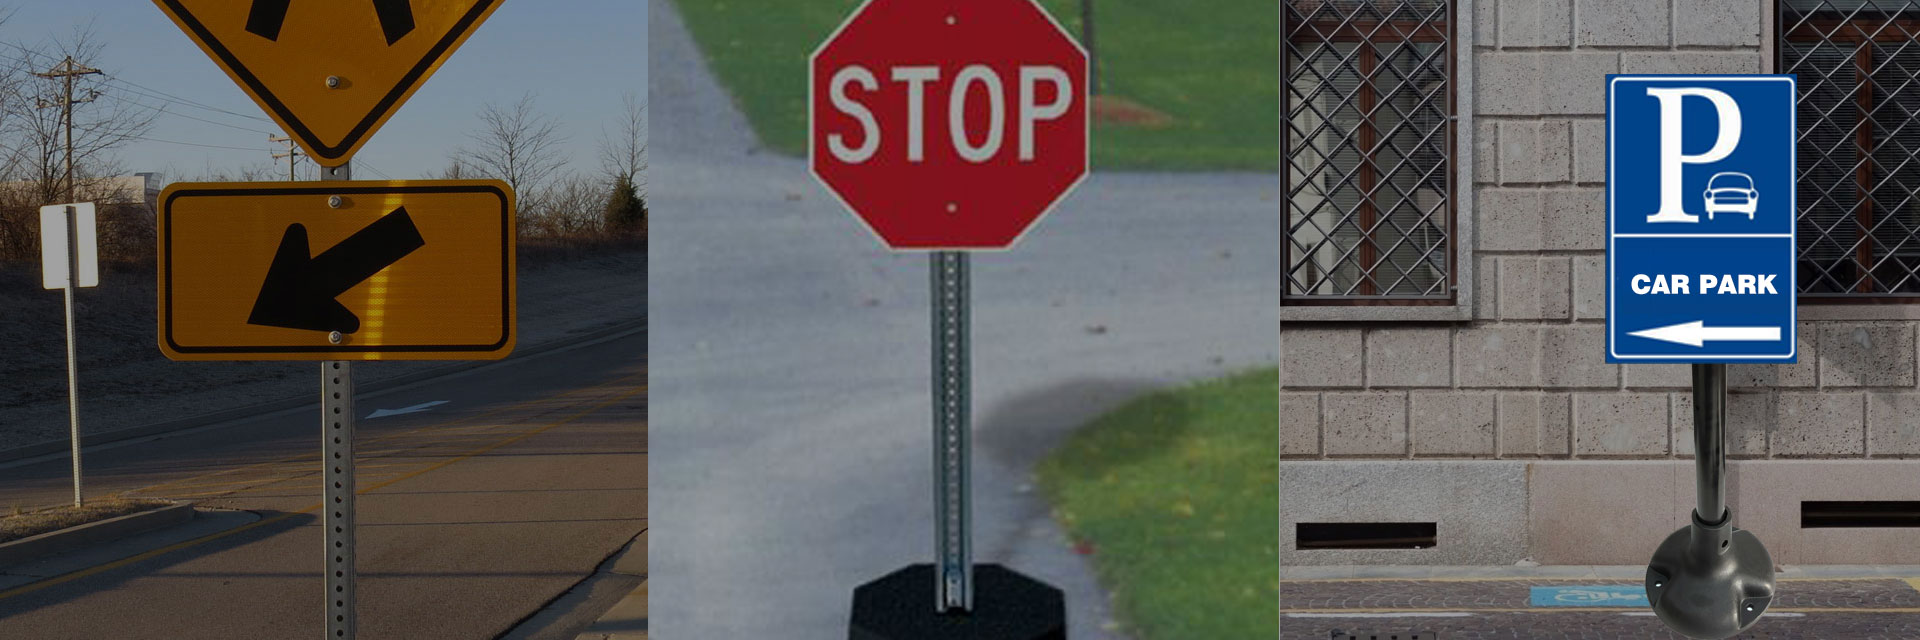 perforated road traffic sign post.